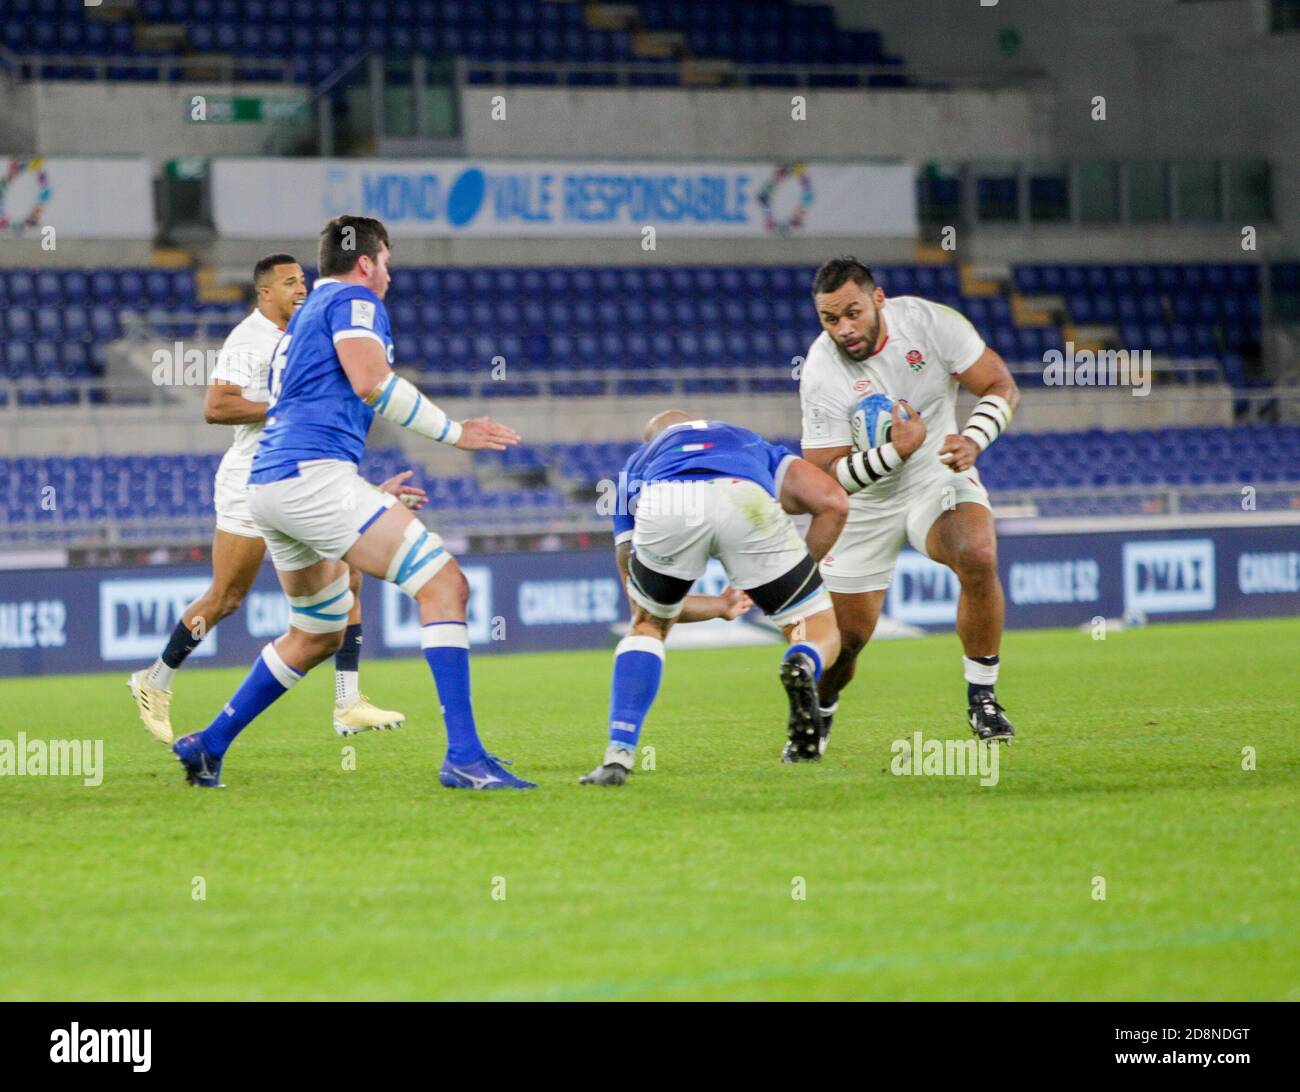 Rome, Italy. 31st Oct, 2020. rome, Italy, Stadio Olimpico, 31 Oct 2020, Billy Vunipola (England) during Italy vs England - Rugby Six Nations match - Credit: LM/Luigi Mariani Credit: Luigi Mariani/LPS/ZUMA Wire/Alamy Live News Stock Photo